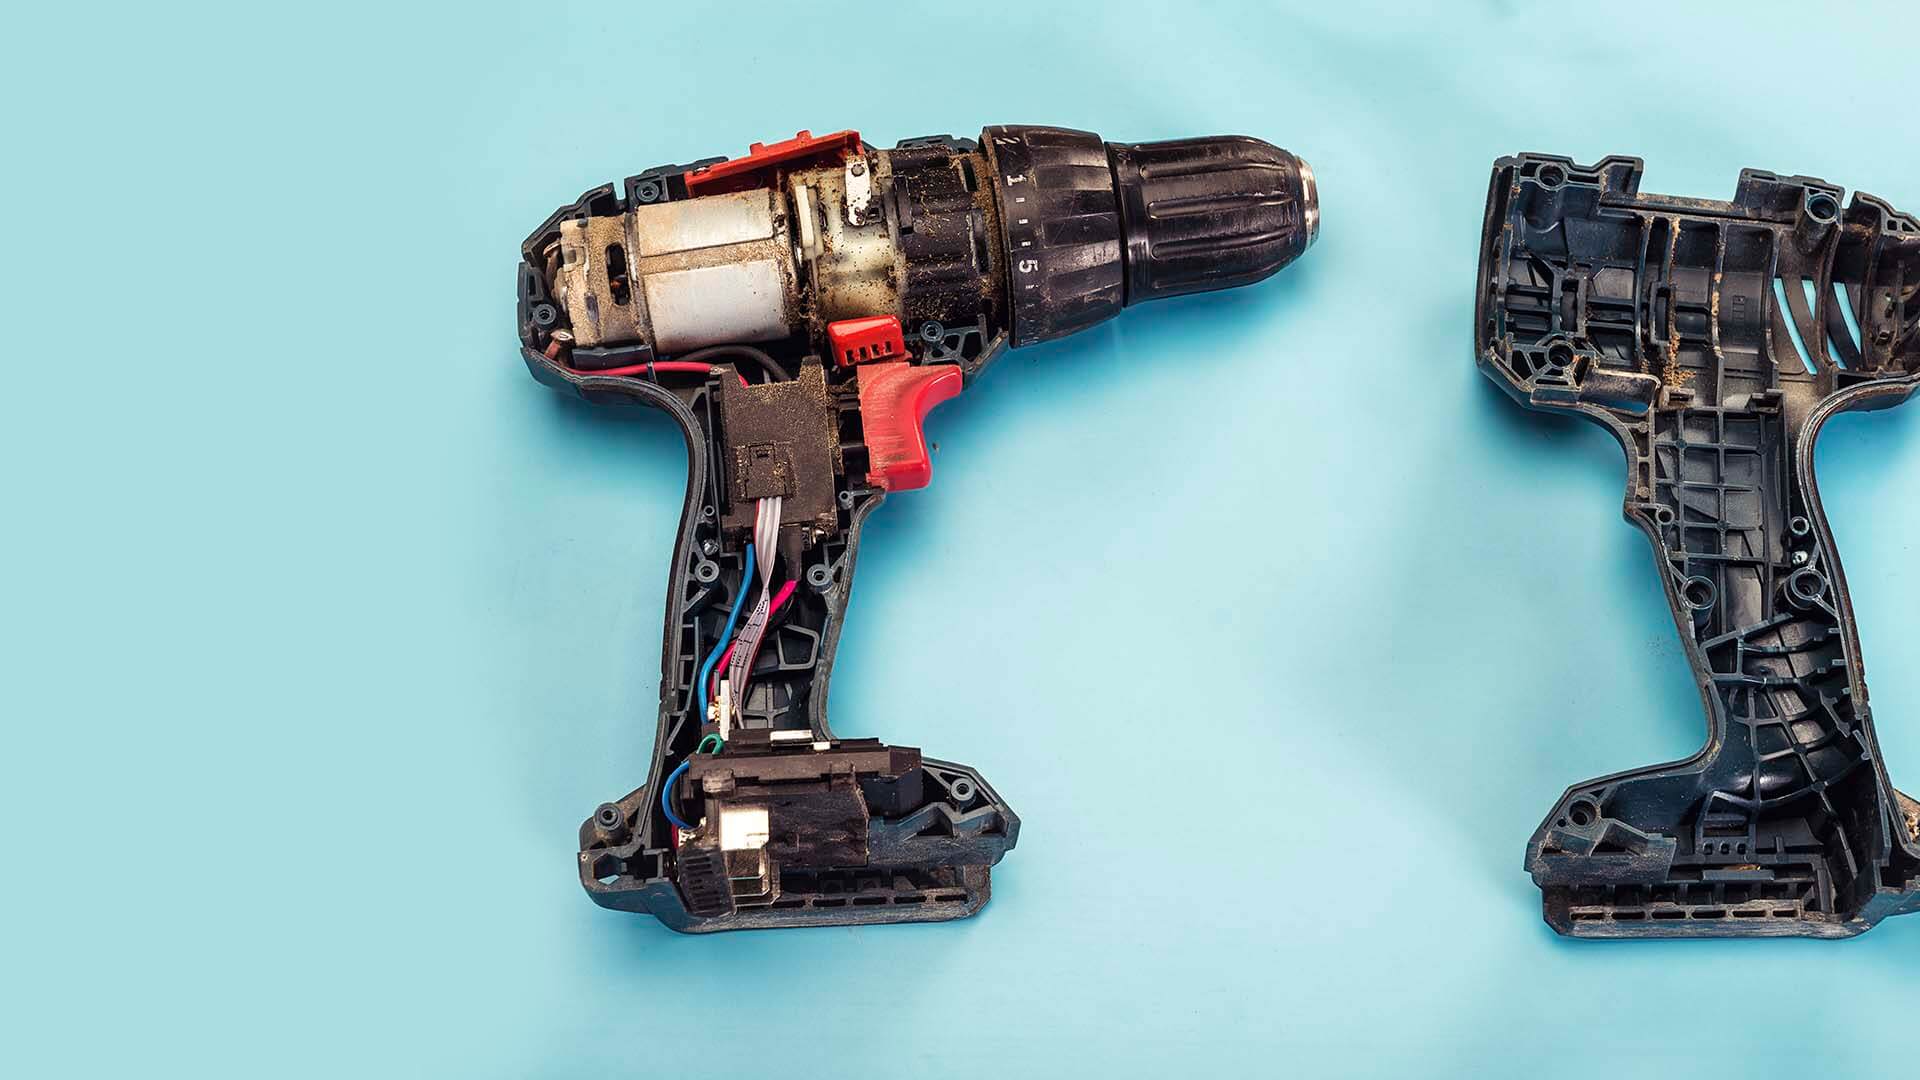 A defective power tool being investigate for causing an electrical injury